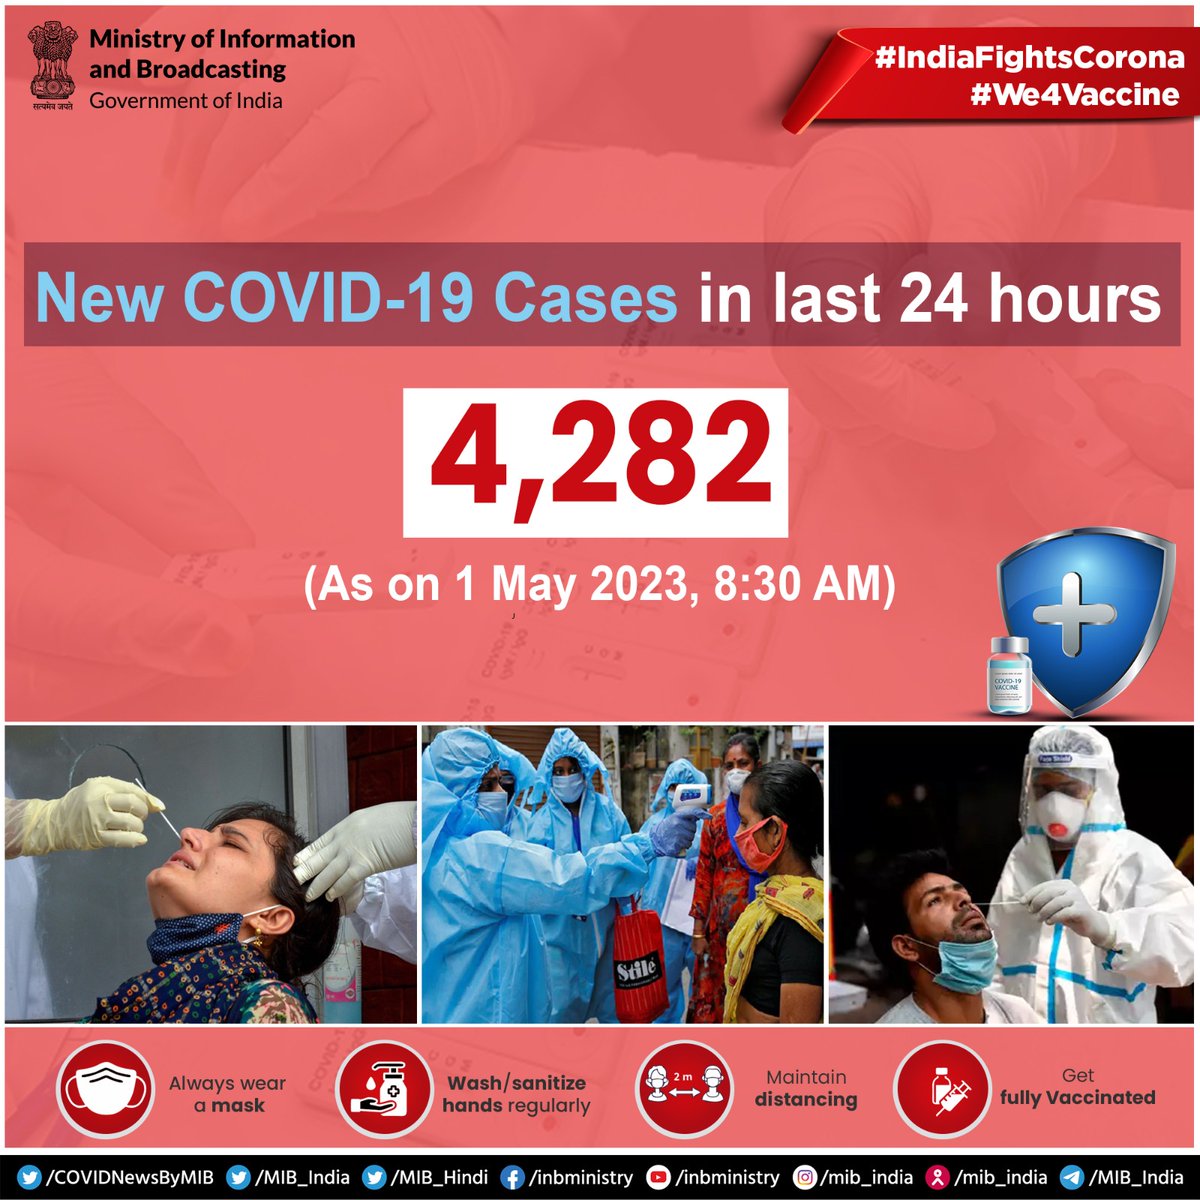 #IndiaFightsCorona:

📍New #COVID19 cases in last 24 hours (As on 01st May, 2023): 4,282

✅Keep following #COVIDAppropriateBehaviour 

➡️Always wear a mask
➡️Wash/sanitize hands regularly
➡️Maintain distancing
➡️Get yourself fully vaccinated

#Unite2FightCorona 
#We4Vaccine